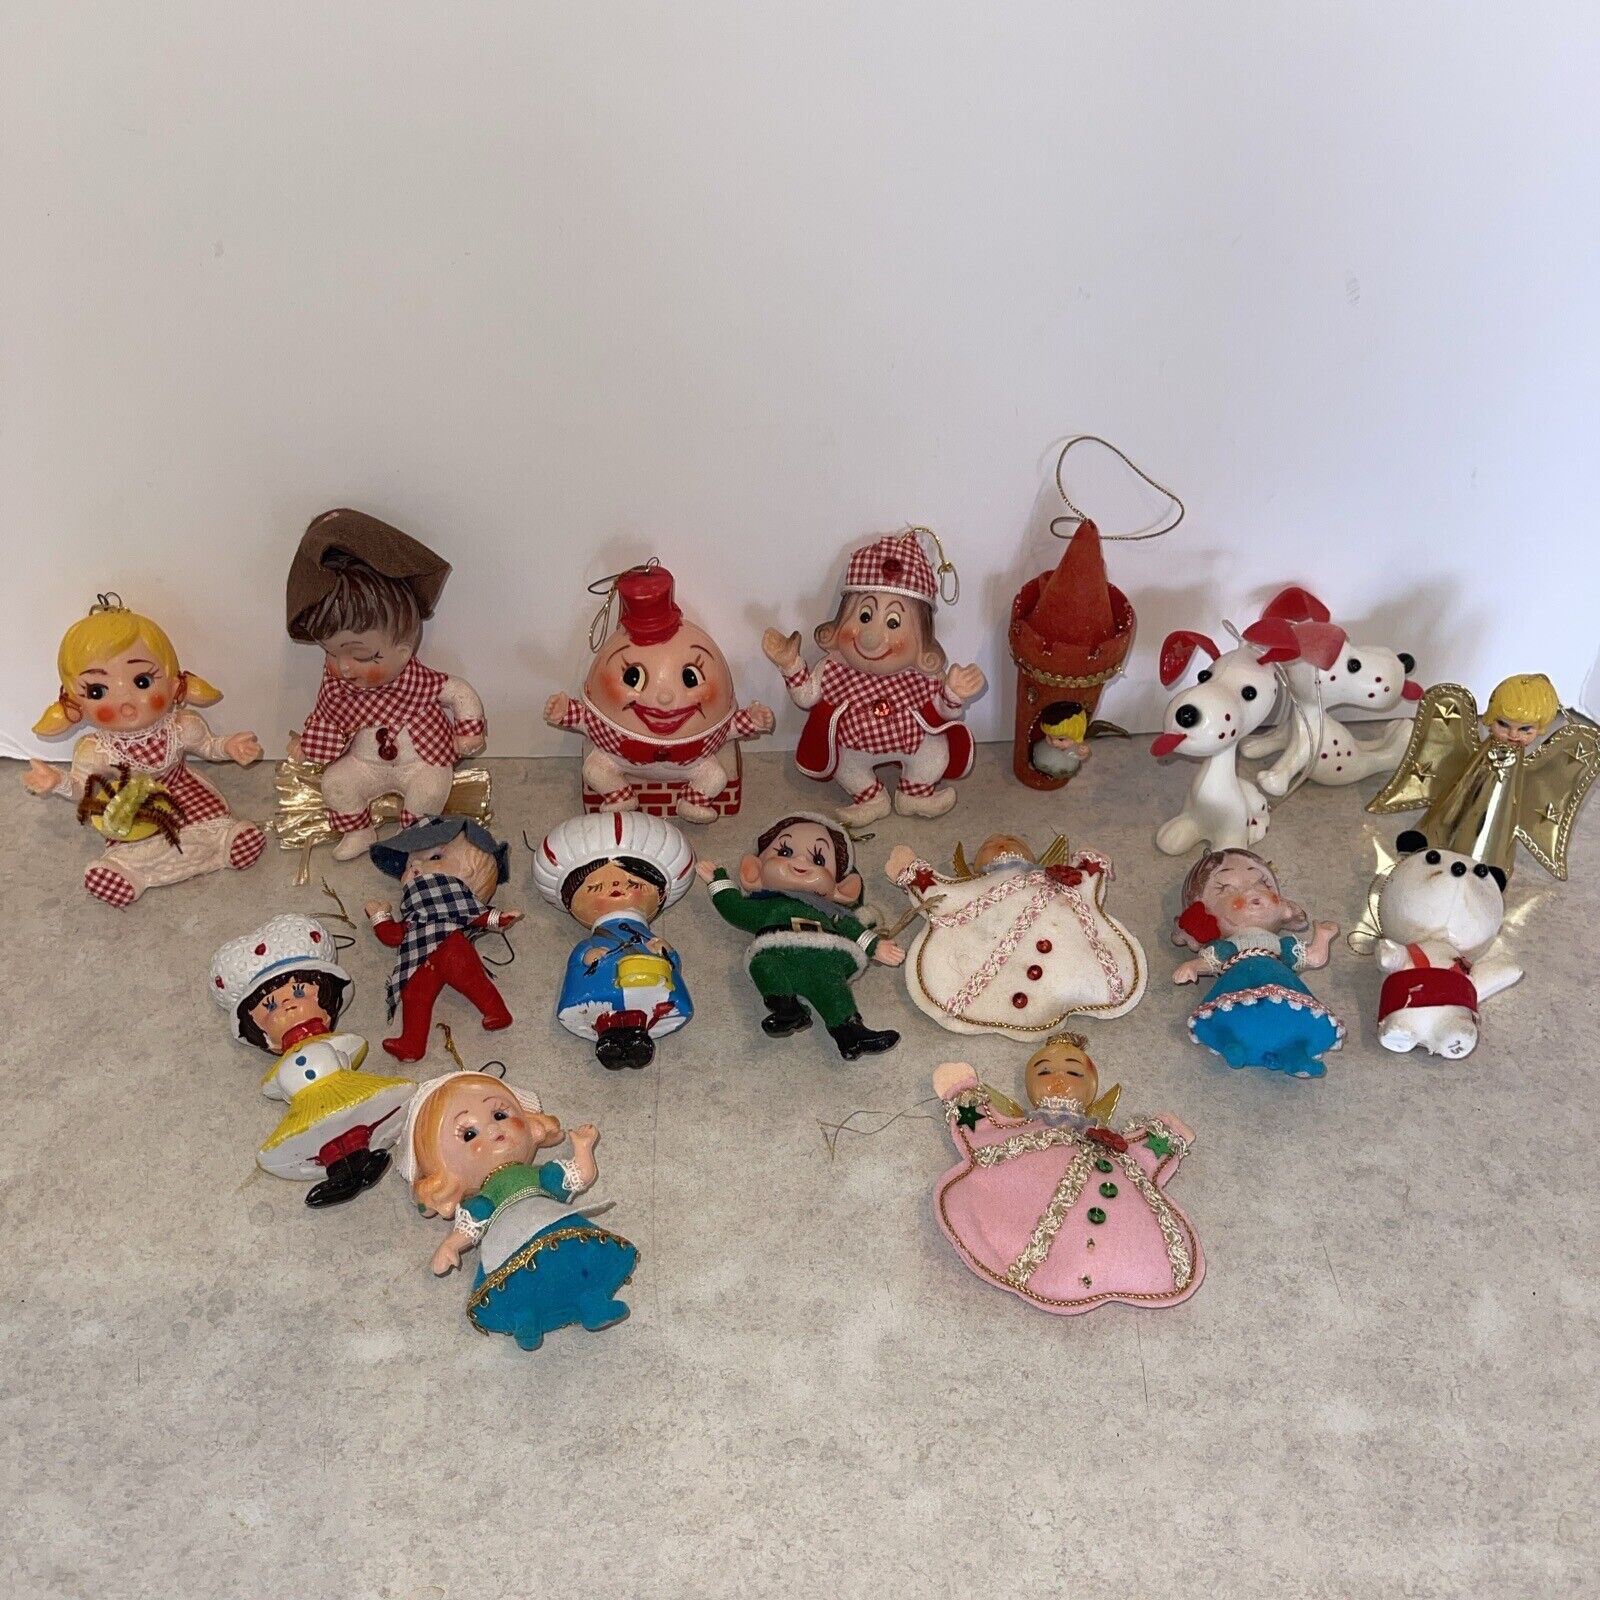 Lot 17 Vtg Christmas Ornaments Plastic Face Humpy Snoopy King Cole Elf 60’s 